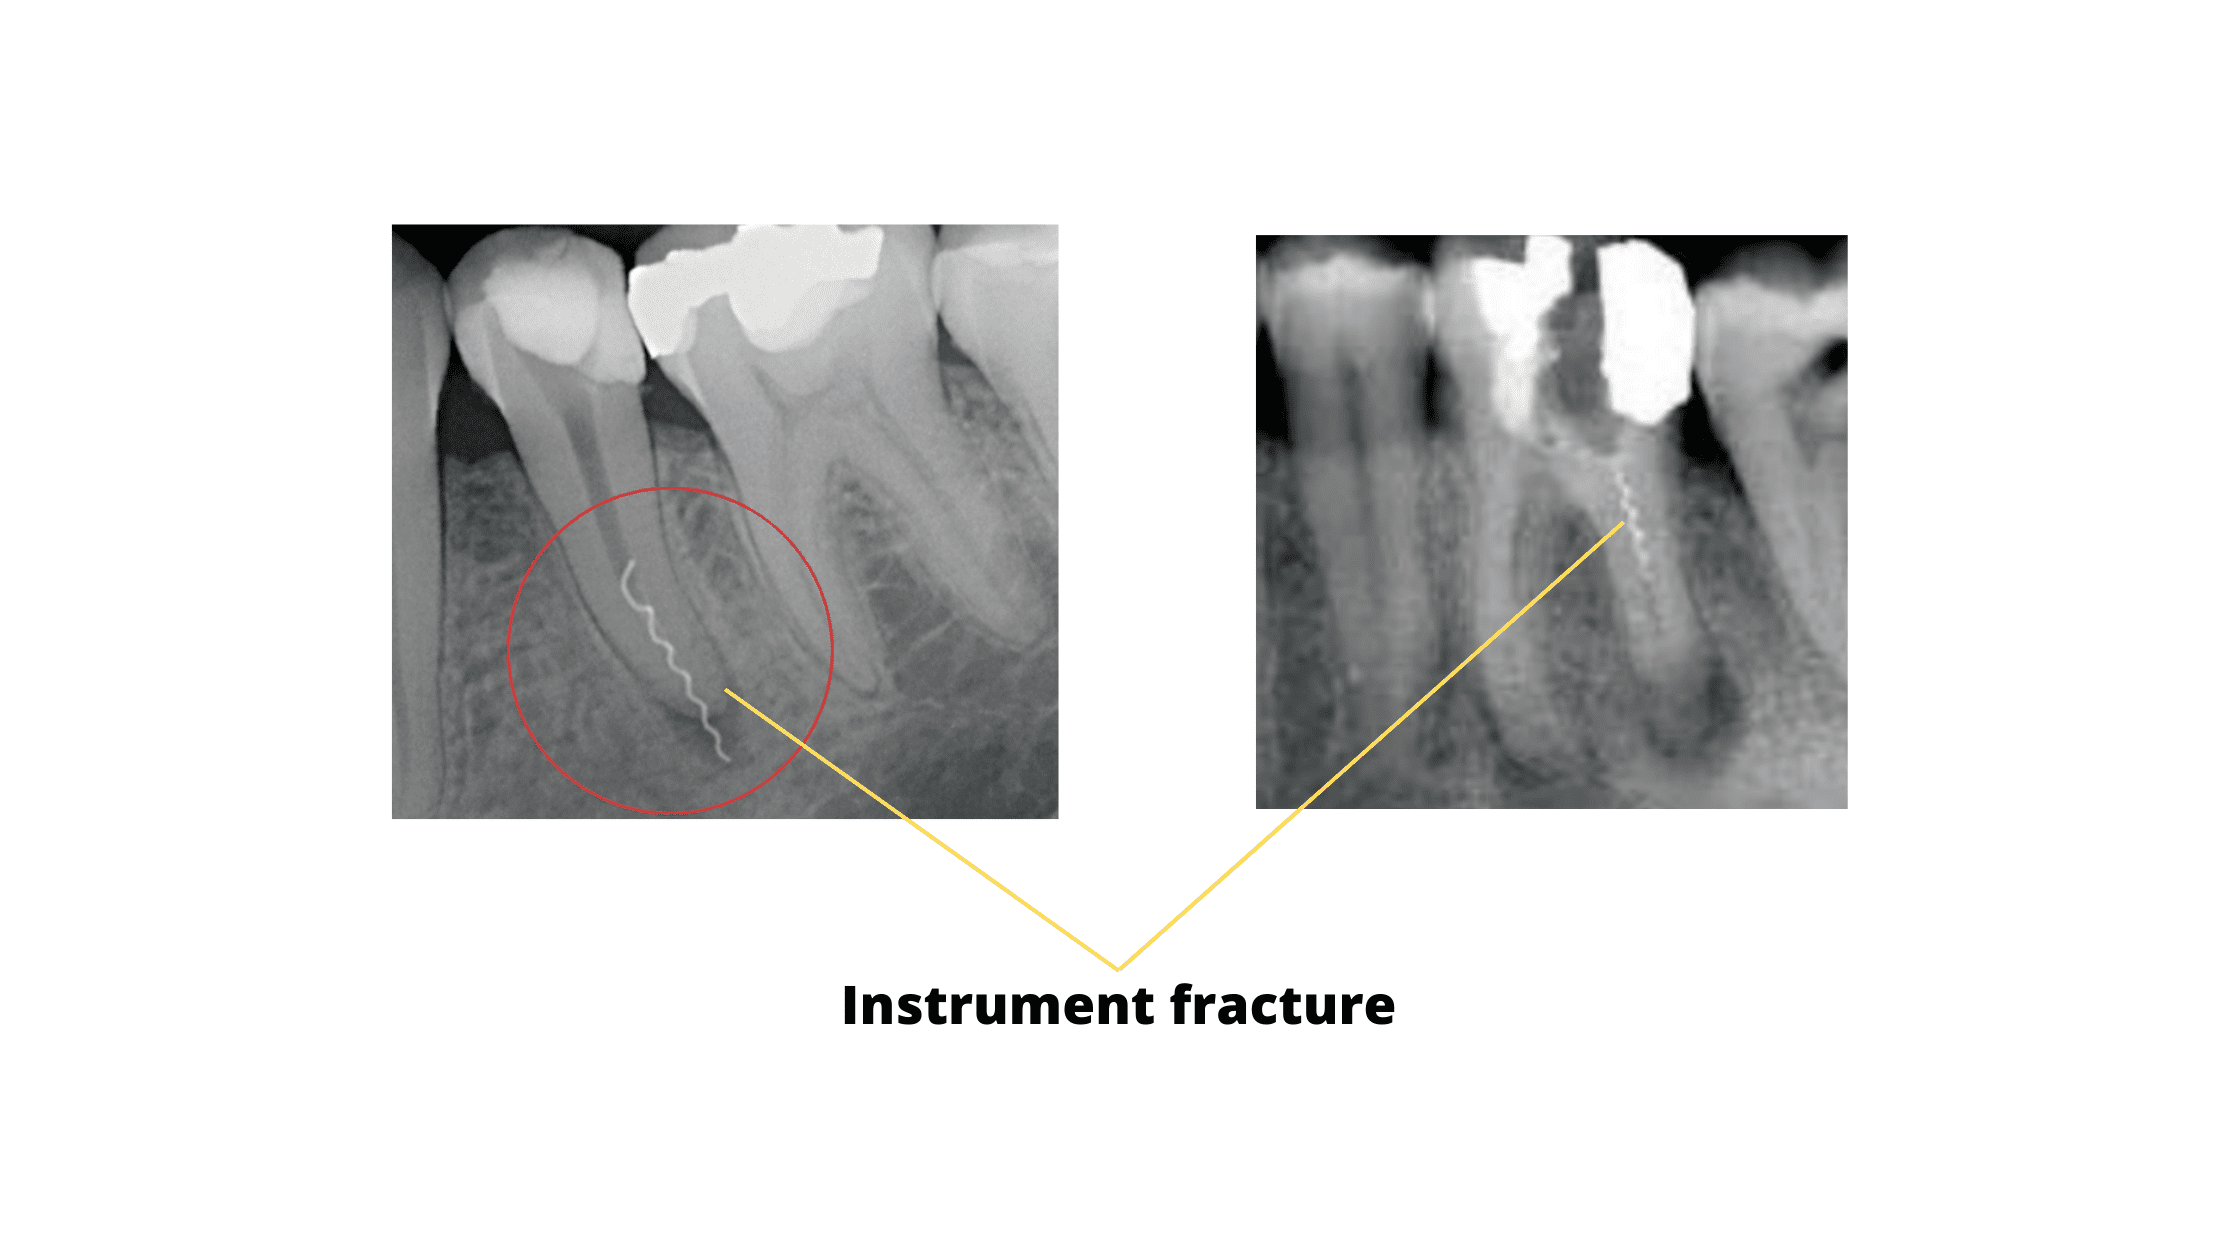 X-ray picture showing instrument fracture